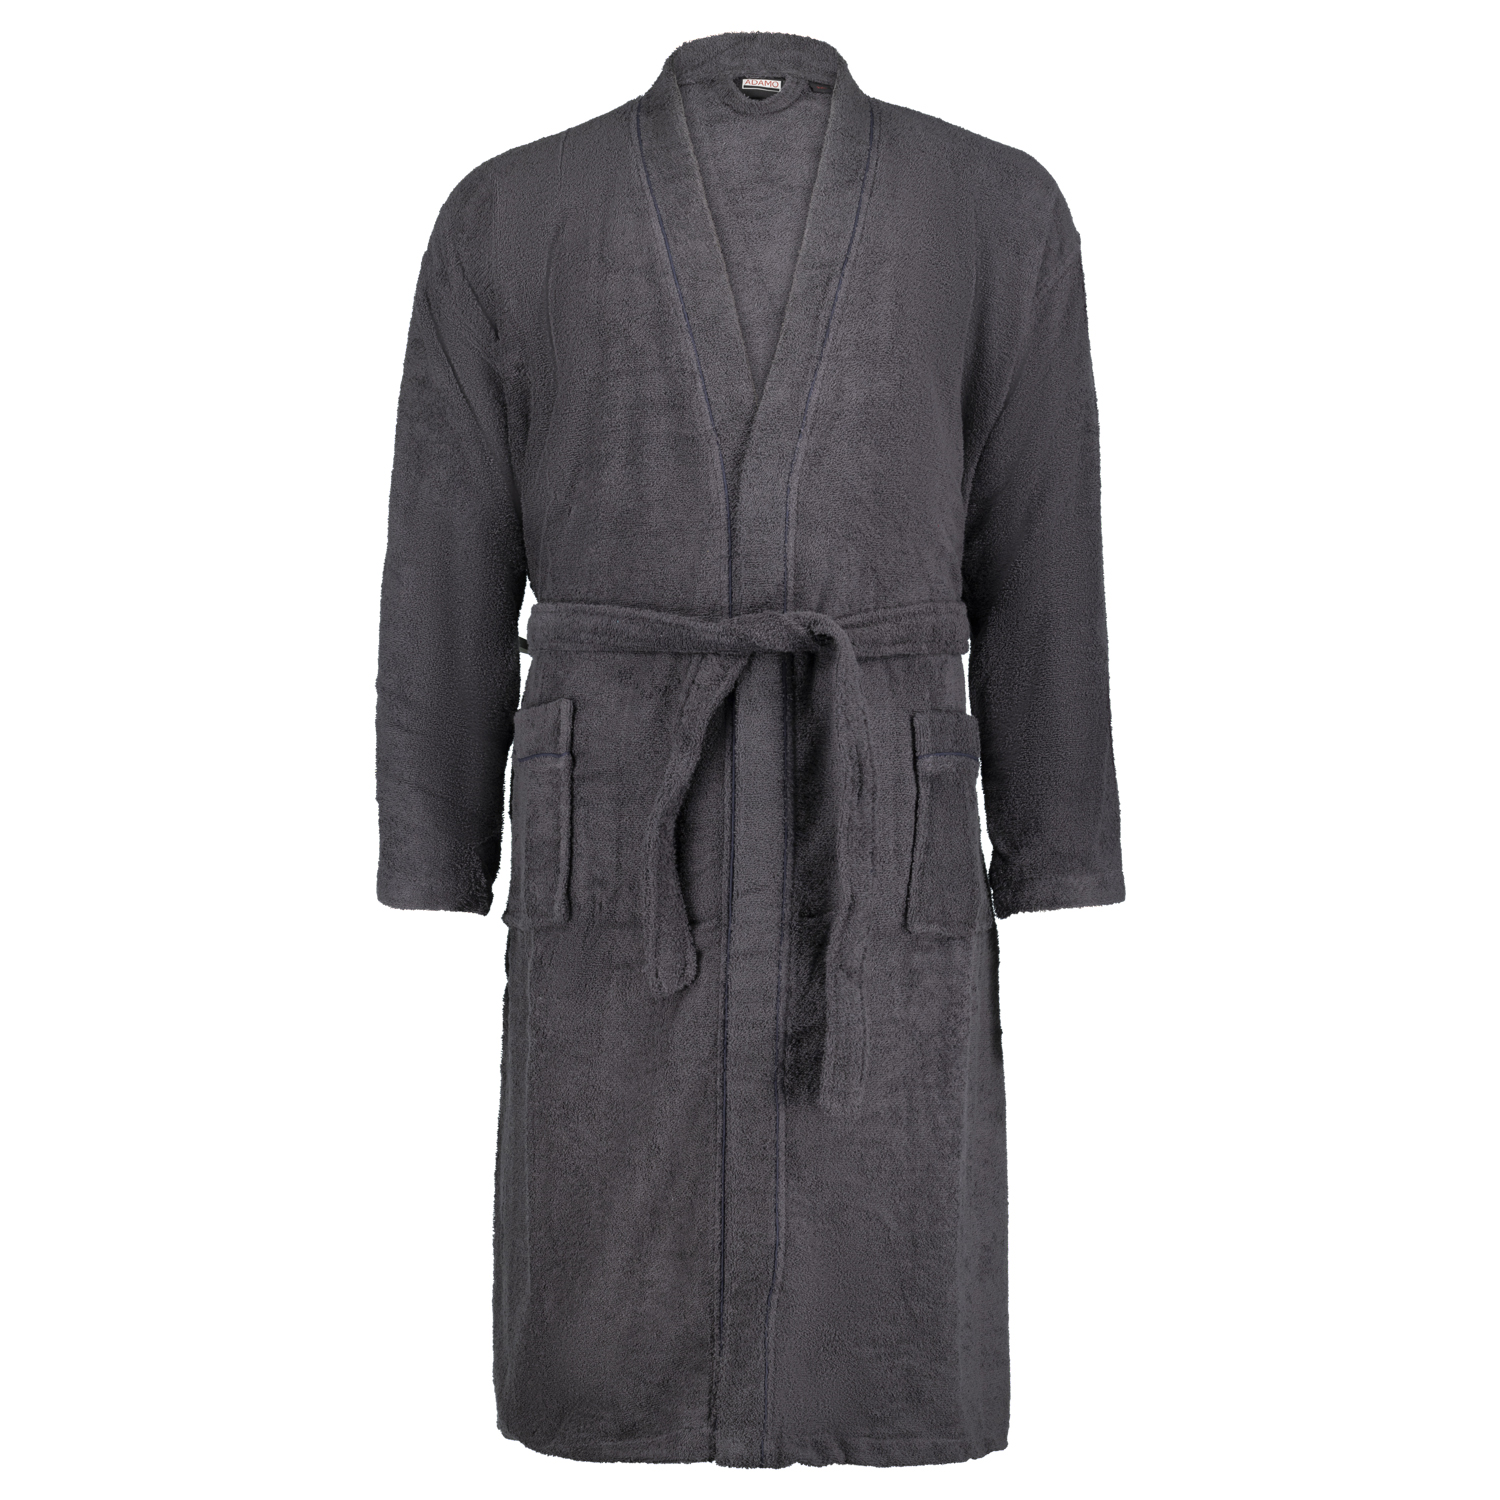 Bathrobe for men in anthracite by ADAMO series "Joey" in oversizes up to 12XL